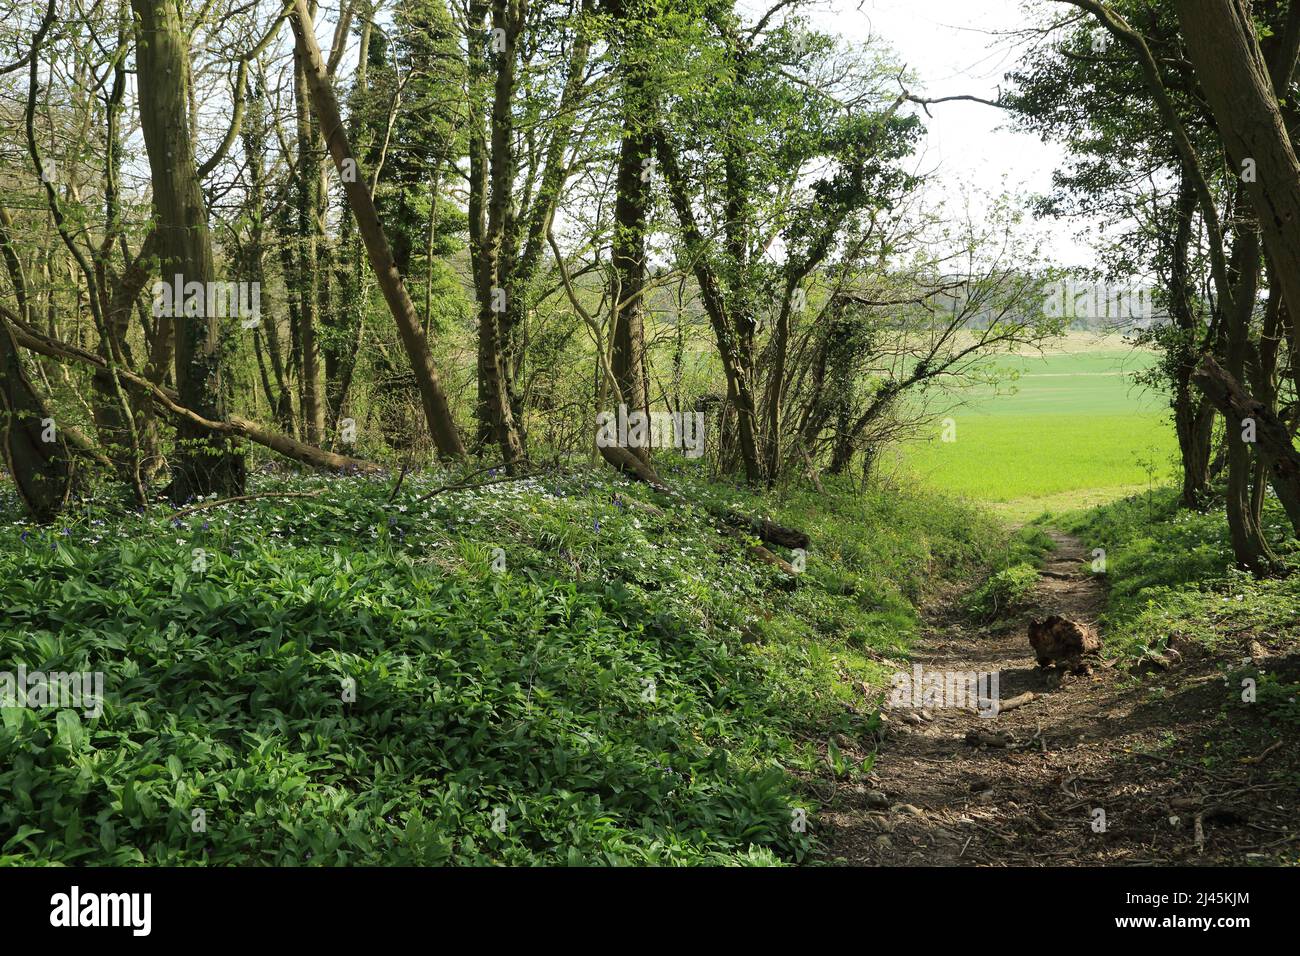 Footpath (HE137), wild garlic and bridleway through Spong Wood nature reserve looking towards fields and open countryside on the Kent North Downs near Stock Photo